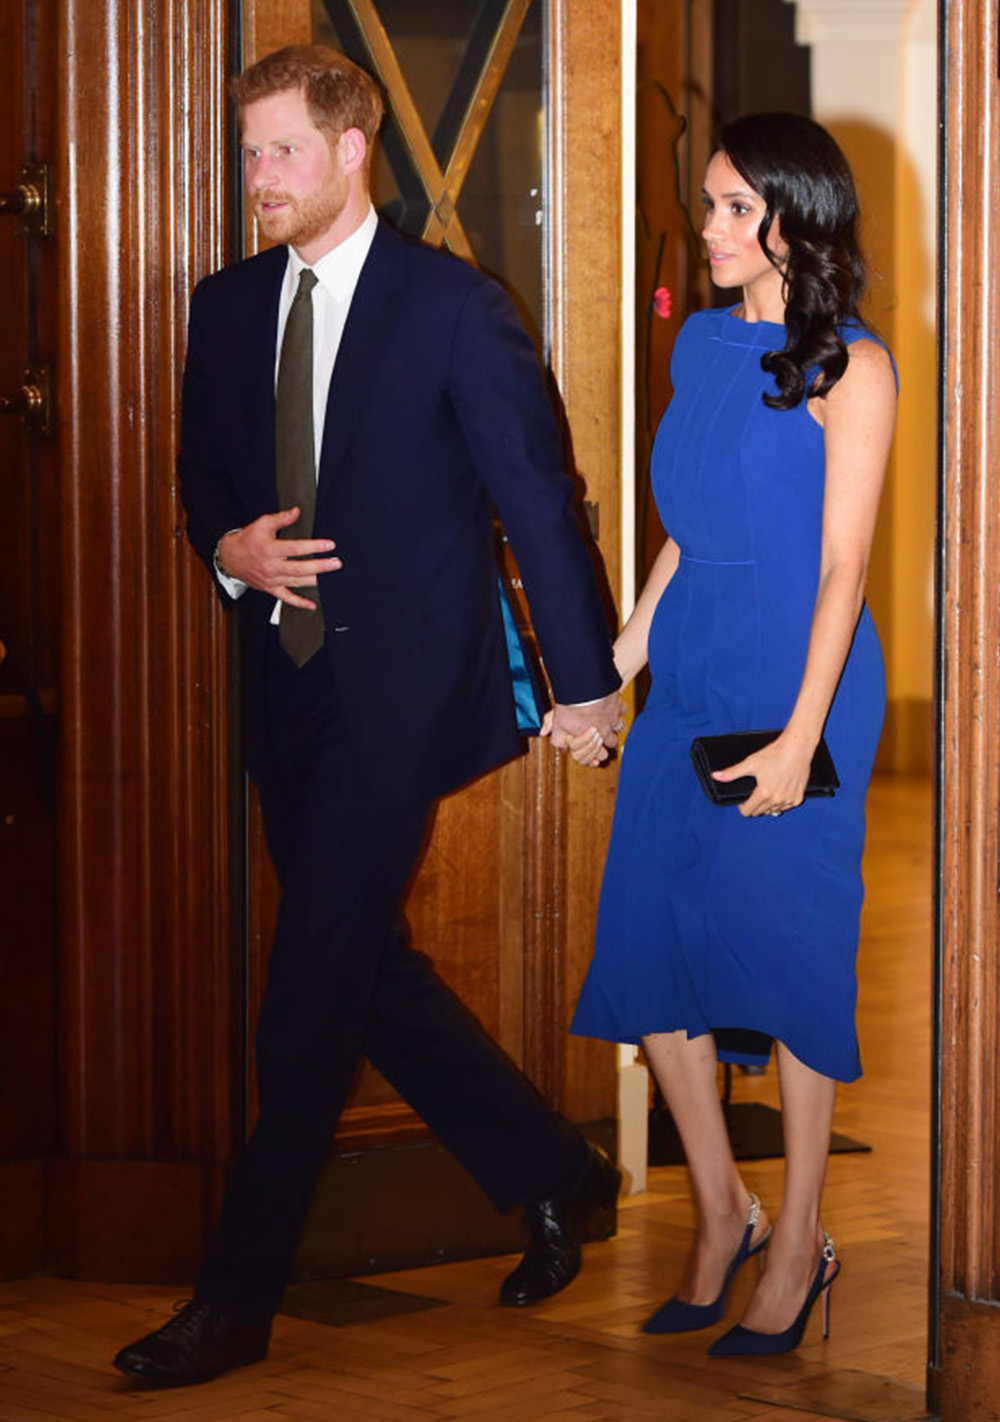 September 6, 2018: Looking bold in blue, Meghan, Duchess of Sussex breaks her suiting streak with a Jason Wu number with a flounce detail down the centre front (enter, the pregnancy rumours!). Meghan accessorised with go-to shoe designer Aquazzura this time with a rhinestone detail across the backstrap and a clutch by Dior attending the ‘100 Days of Peace’ concert in London.